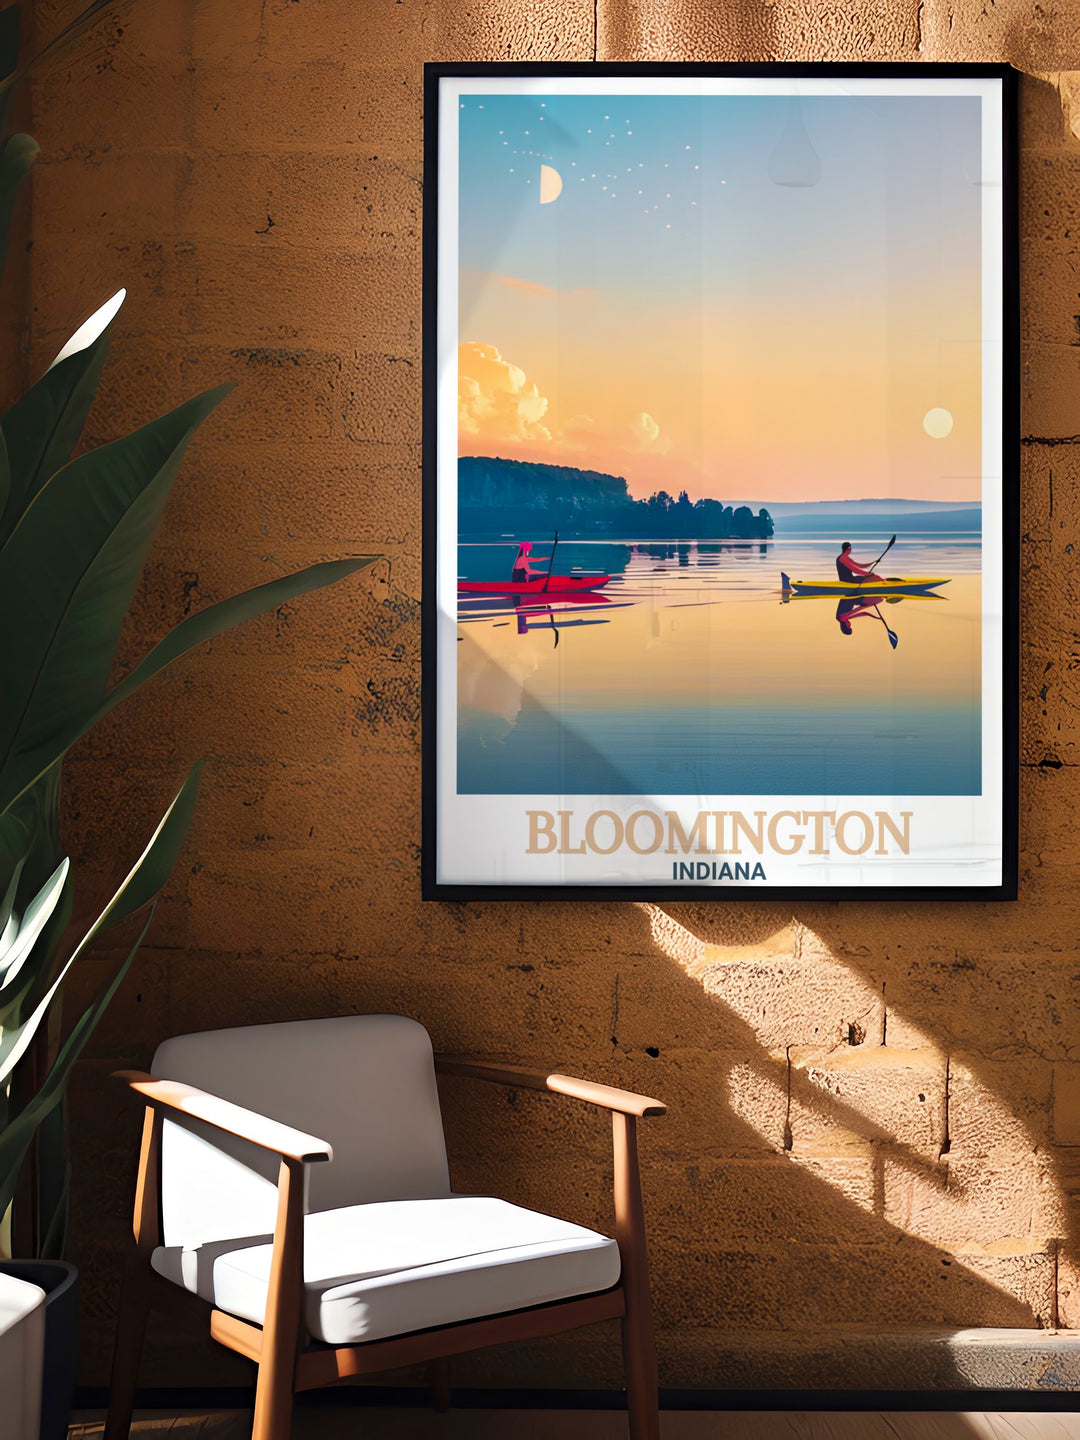 Bloomington Indiana Lake Monroe prints designed to elevate any space with a combination of Bloomington City Map and Skyline adding a modern twist to the vintage feel suitable for various decor styles